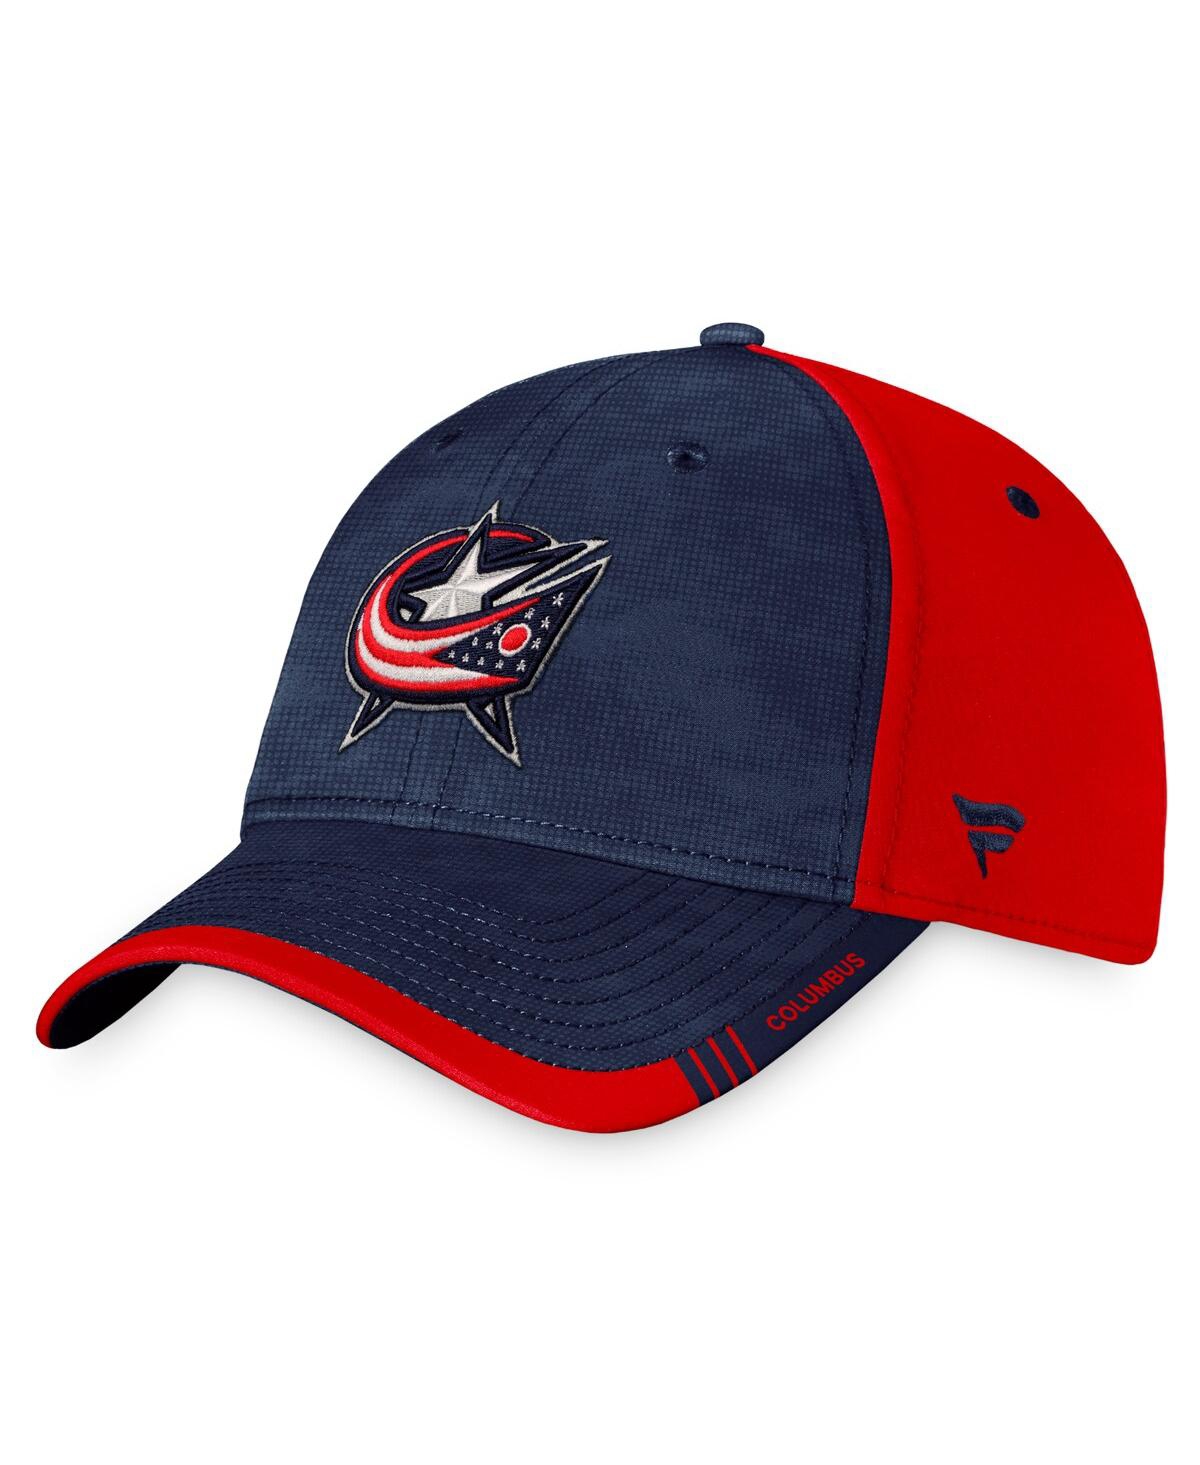 Shop Fanatics Men's  Navy, Red Columbus Blue Jackets Authentic Pro Rink Camo Flex Hat In Navy,red